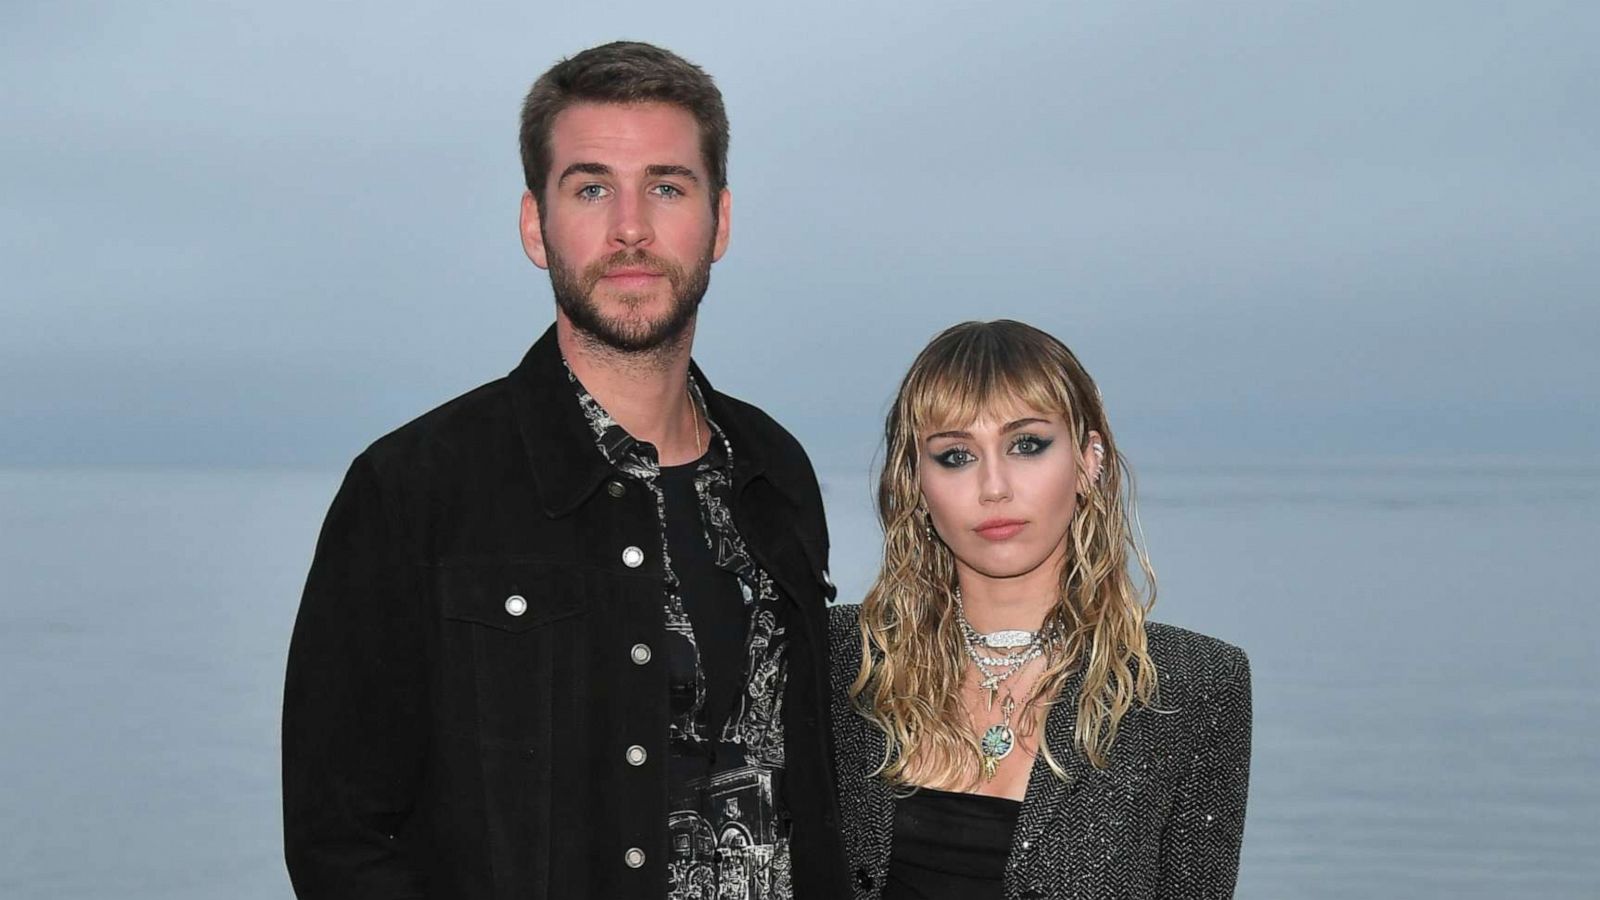 PHOTO: Liam Hemsworth and Miley Cyrus attend the Saint Laurent Mens Spring Summer 20 Show Photo Call, June 6, 2019, in Malibu, Calif.